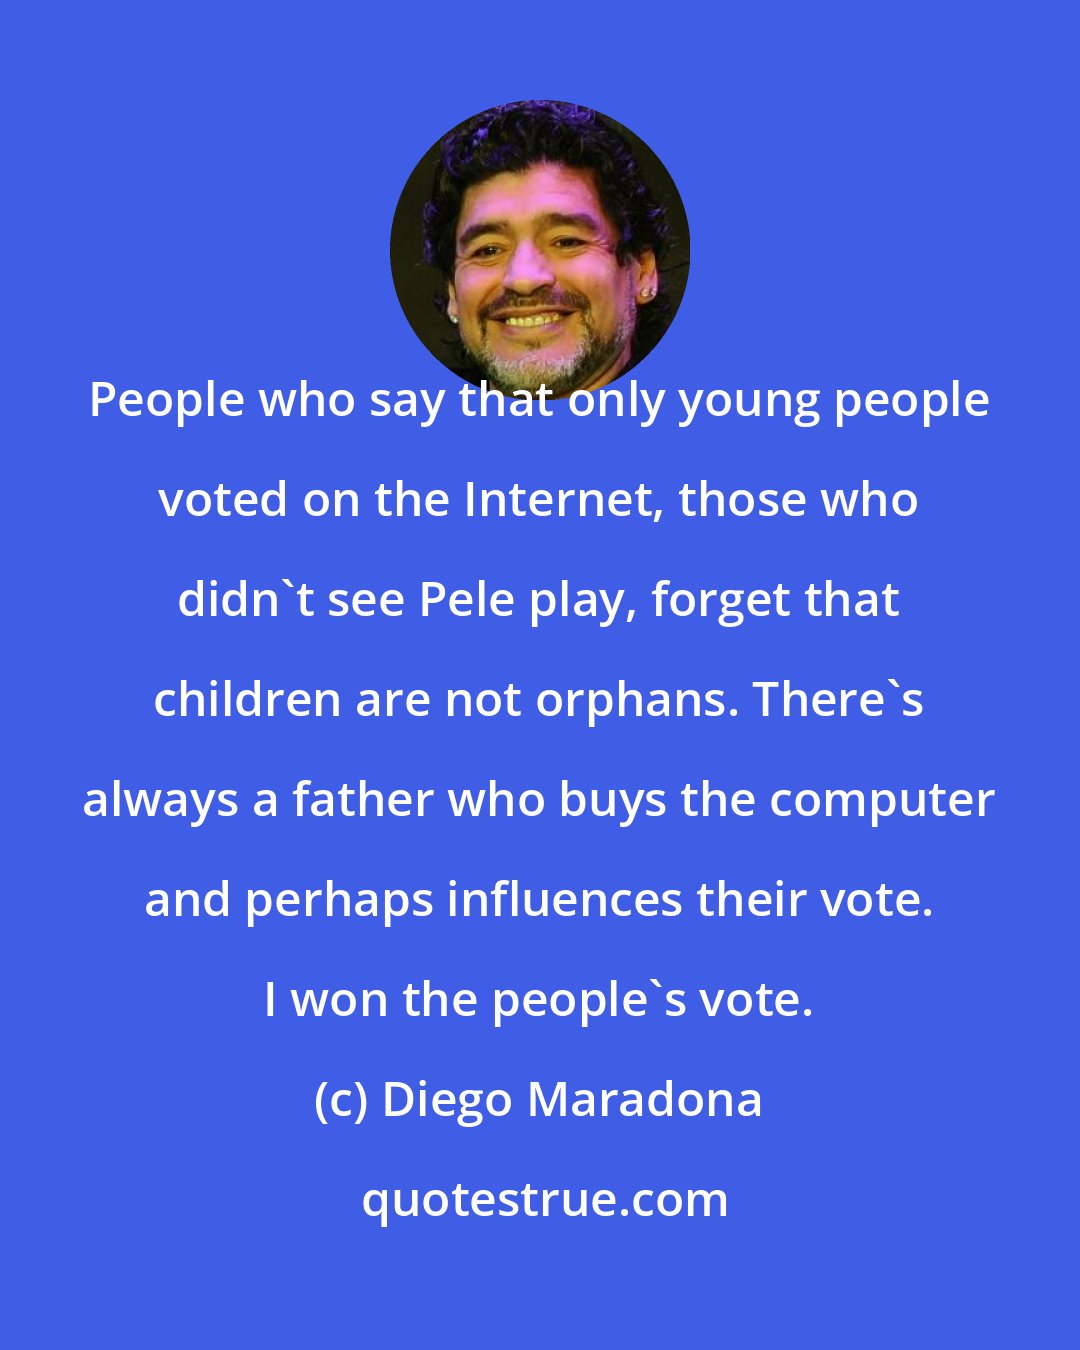 Diego Maradona: People who say that only young people voted on the Internet, those who didn't see Pele play, forget that children are not orphans. There's always a father who buys the computer and perhaps influences their vote. I won the people's vote.